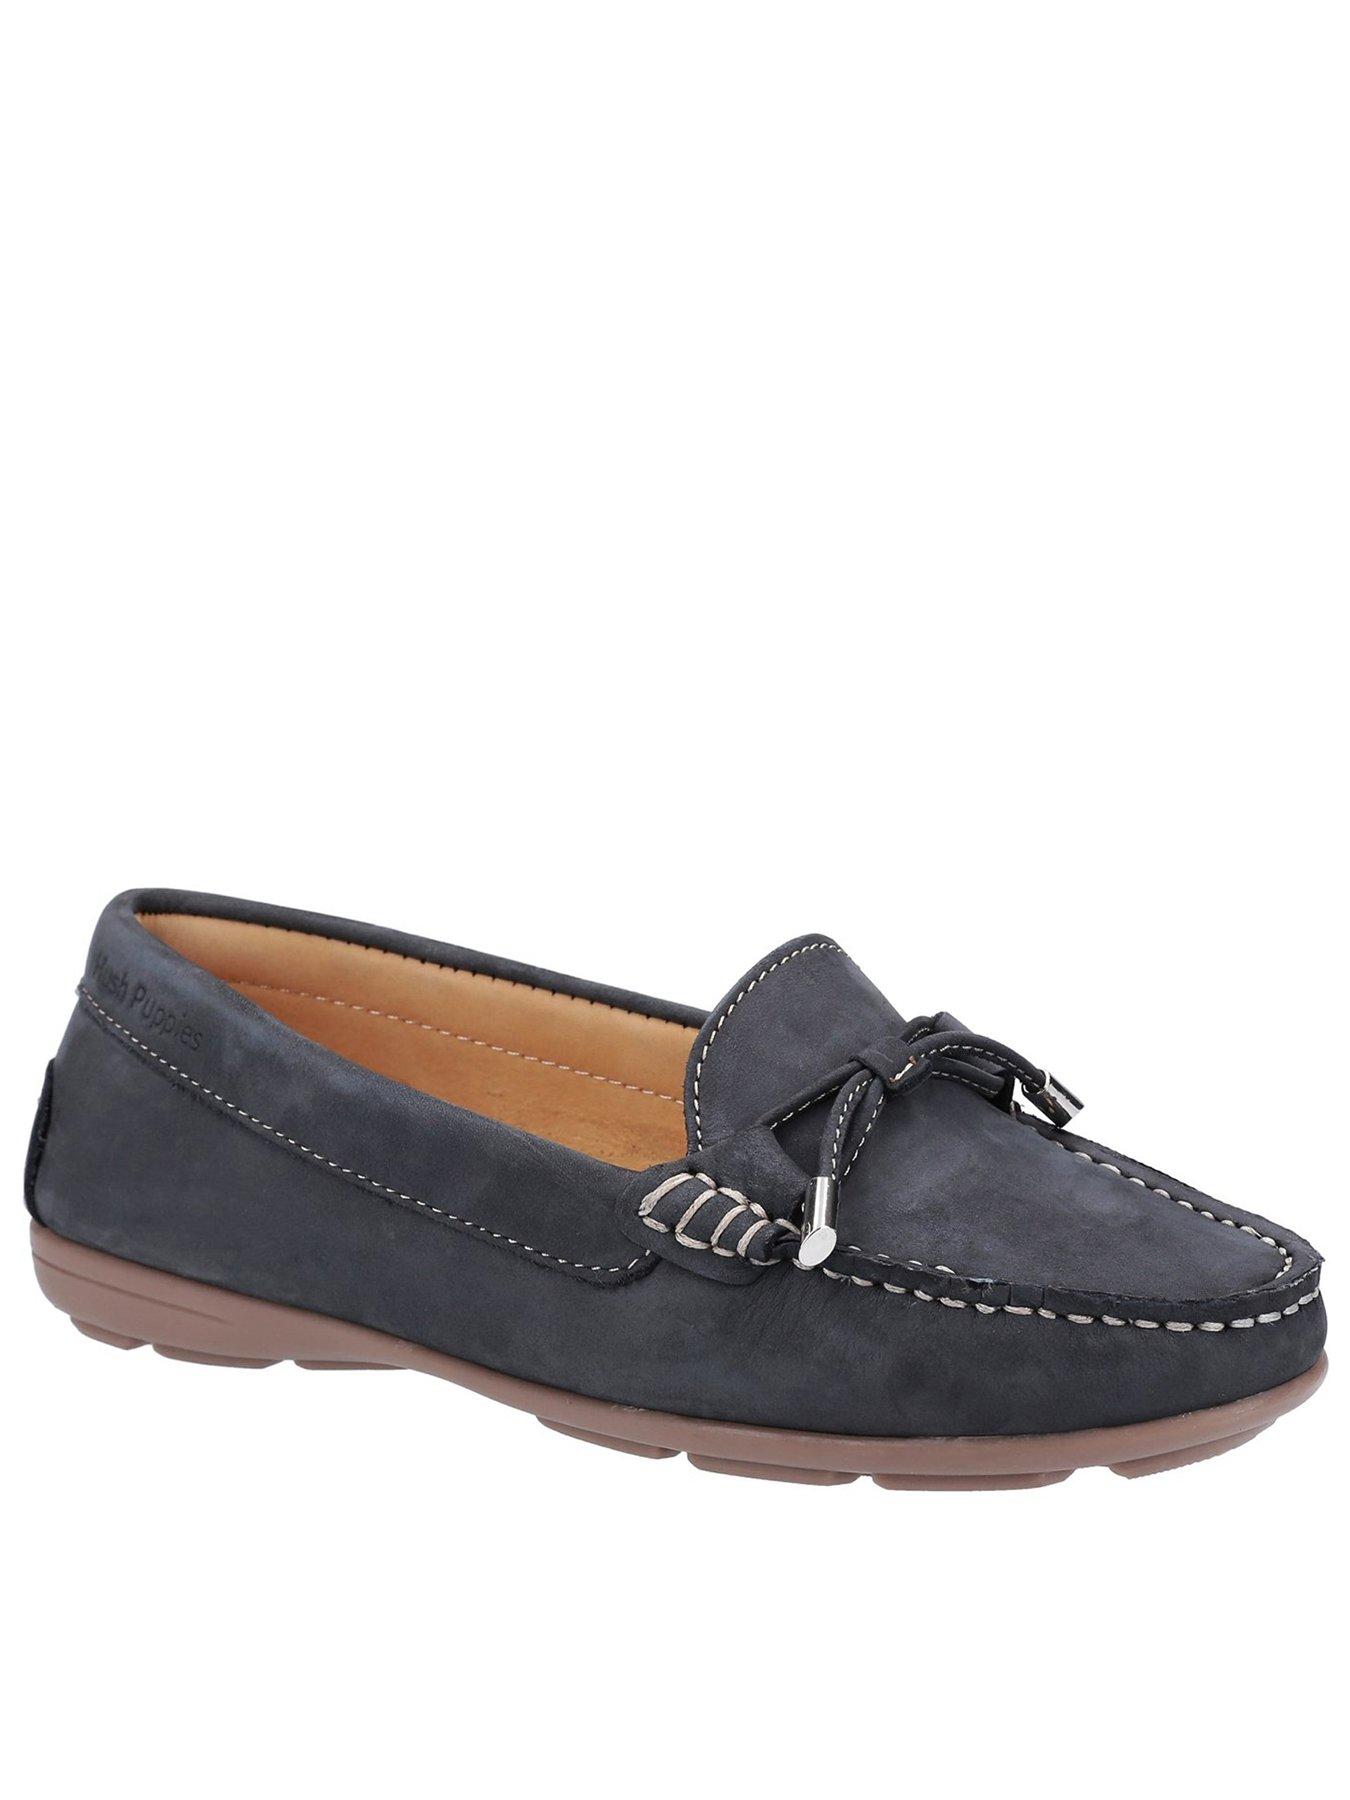 Women Maggie Loafers - Navy